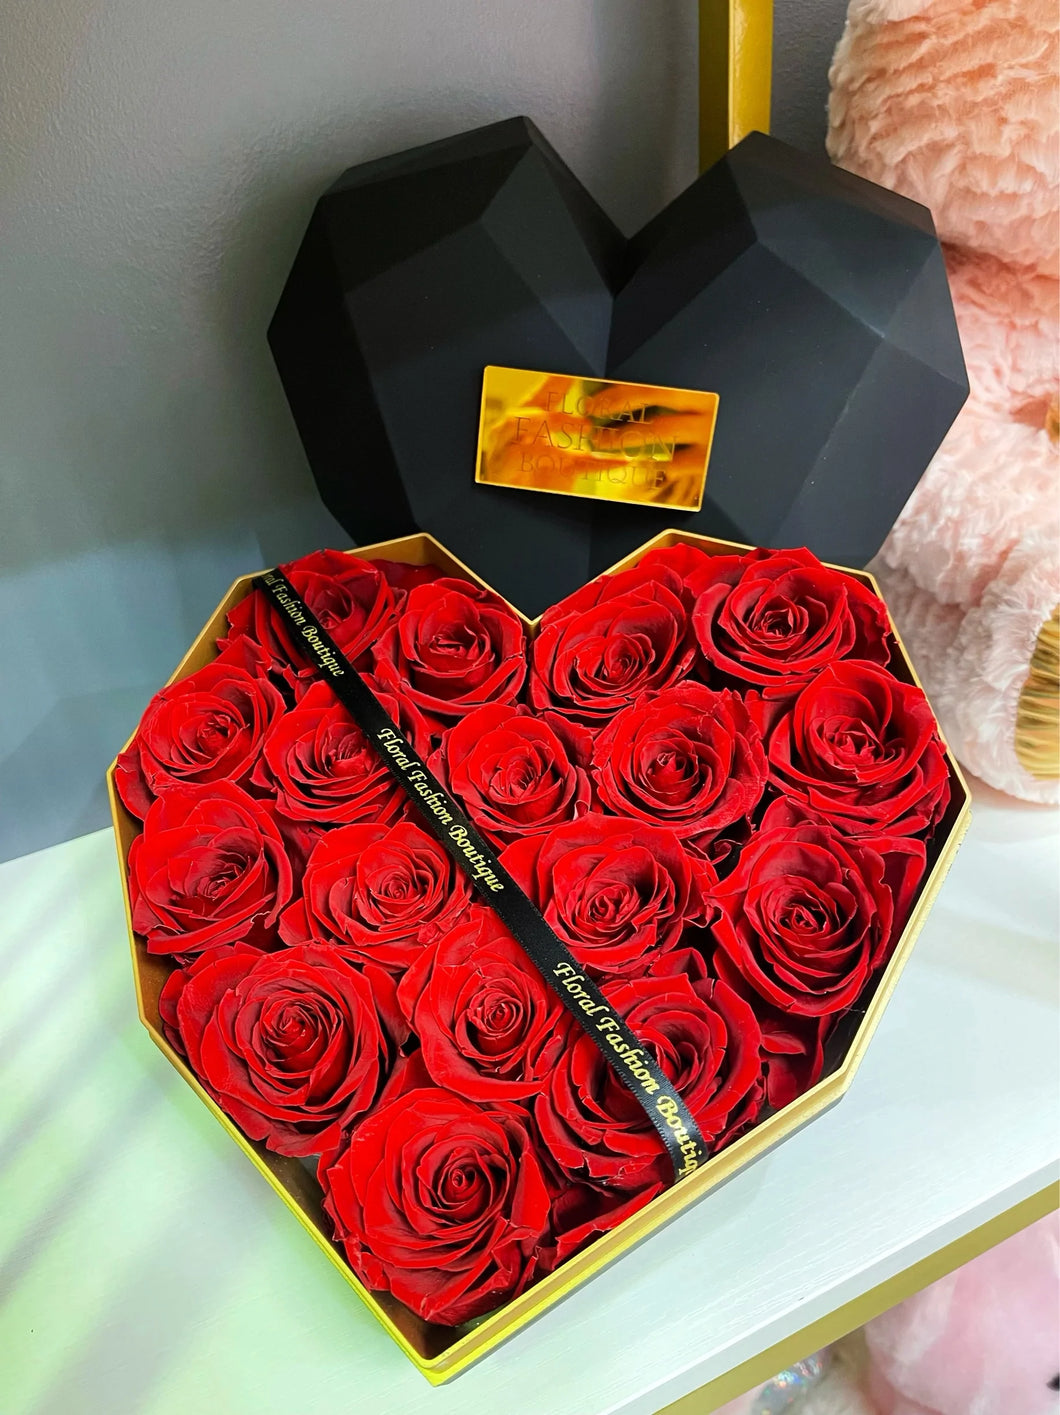 Preserved roses in a heart box